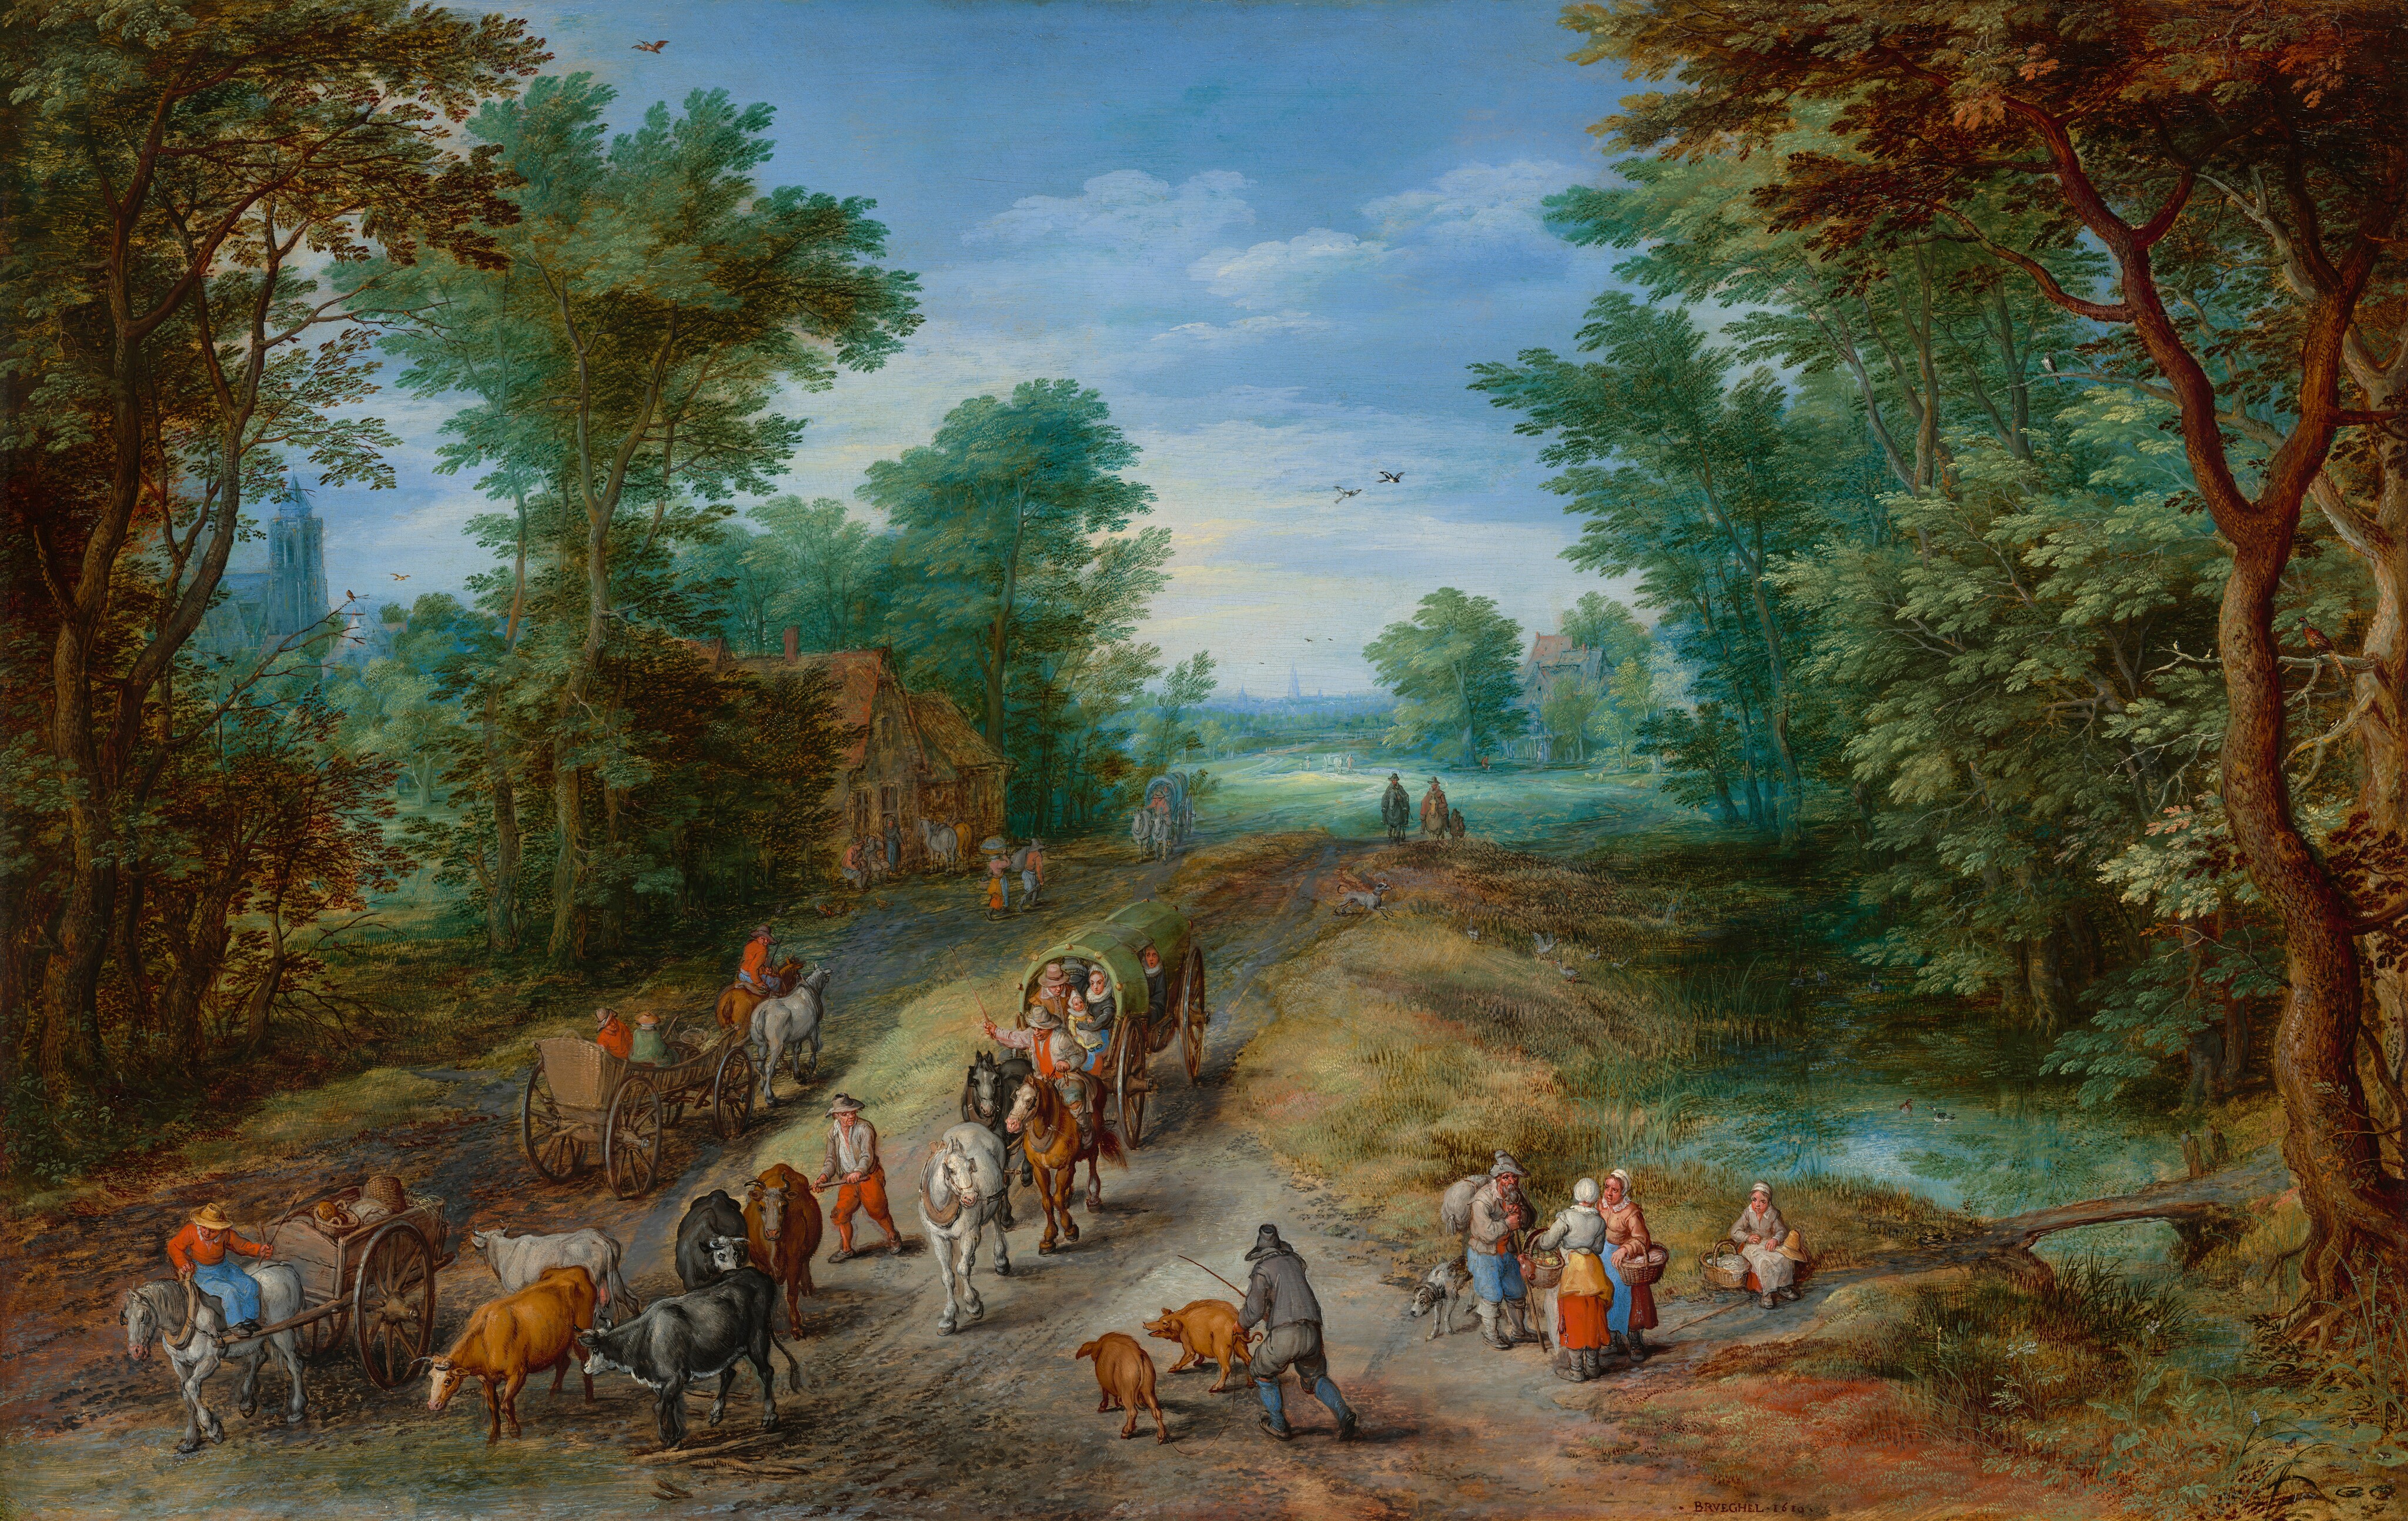 Travelers Landscape with Wooded